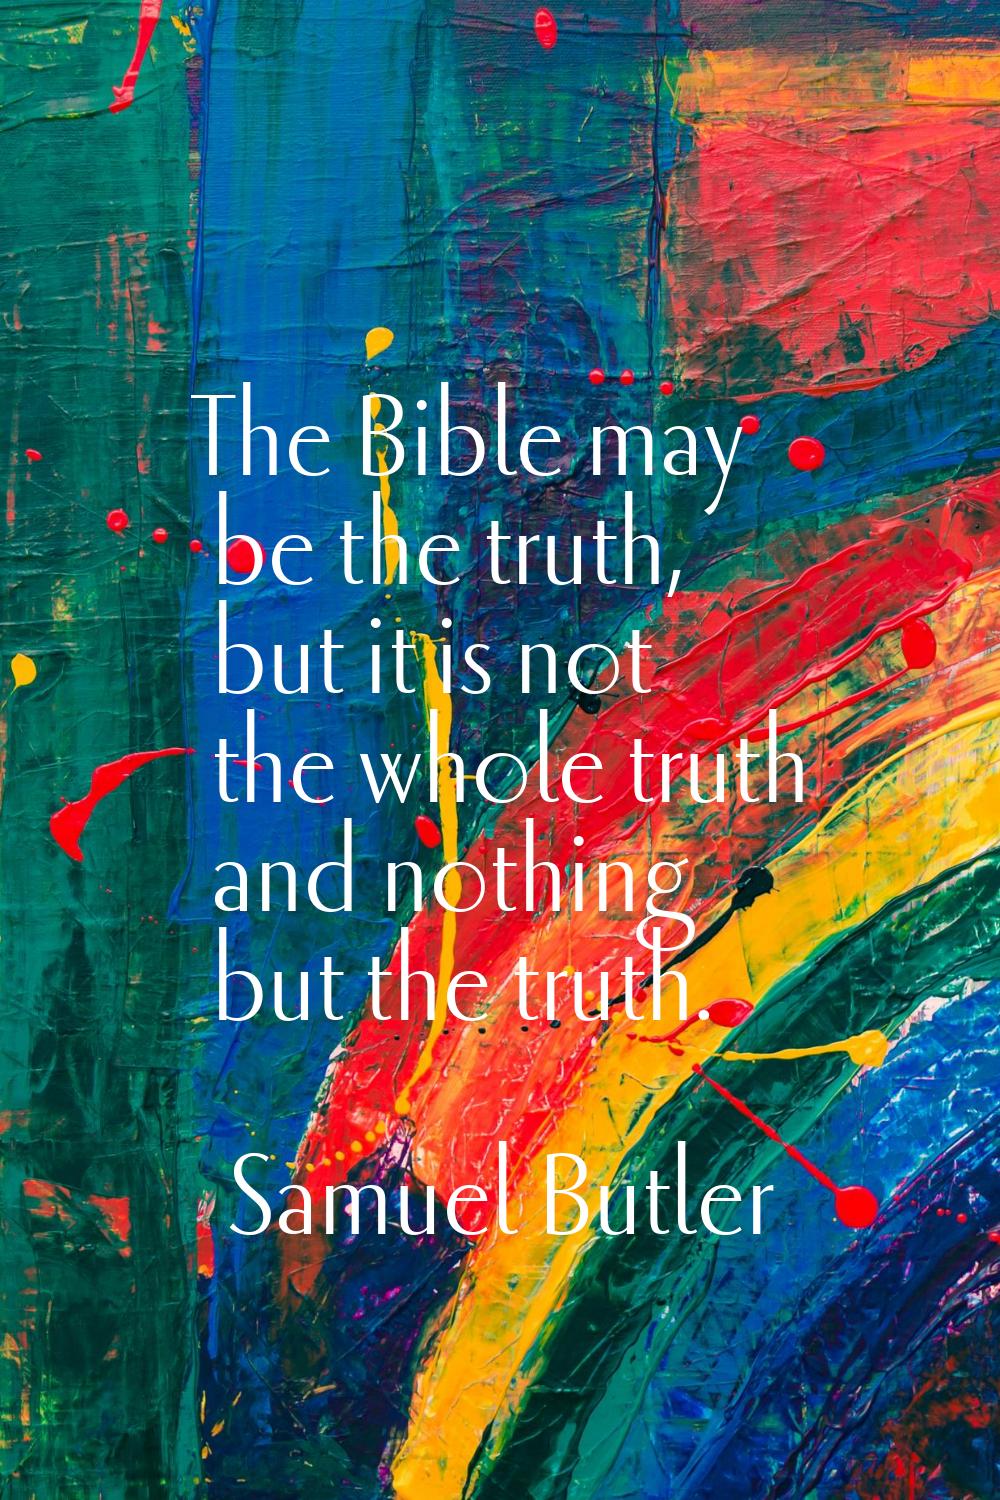 The Bible may be the truth, but it is not the whole truth and nothing but the truth.